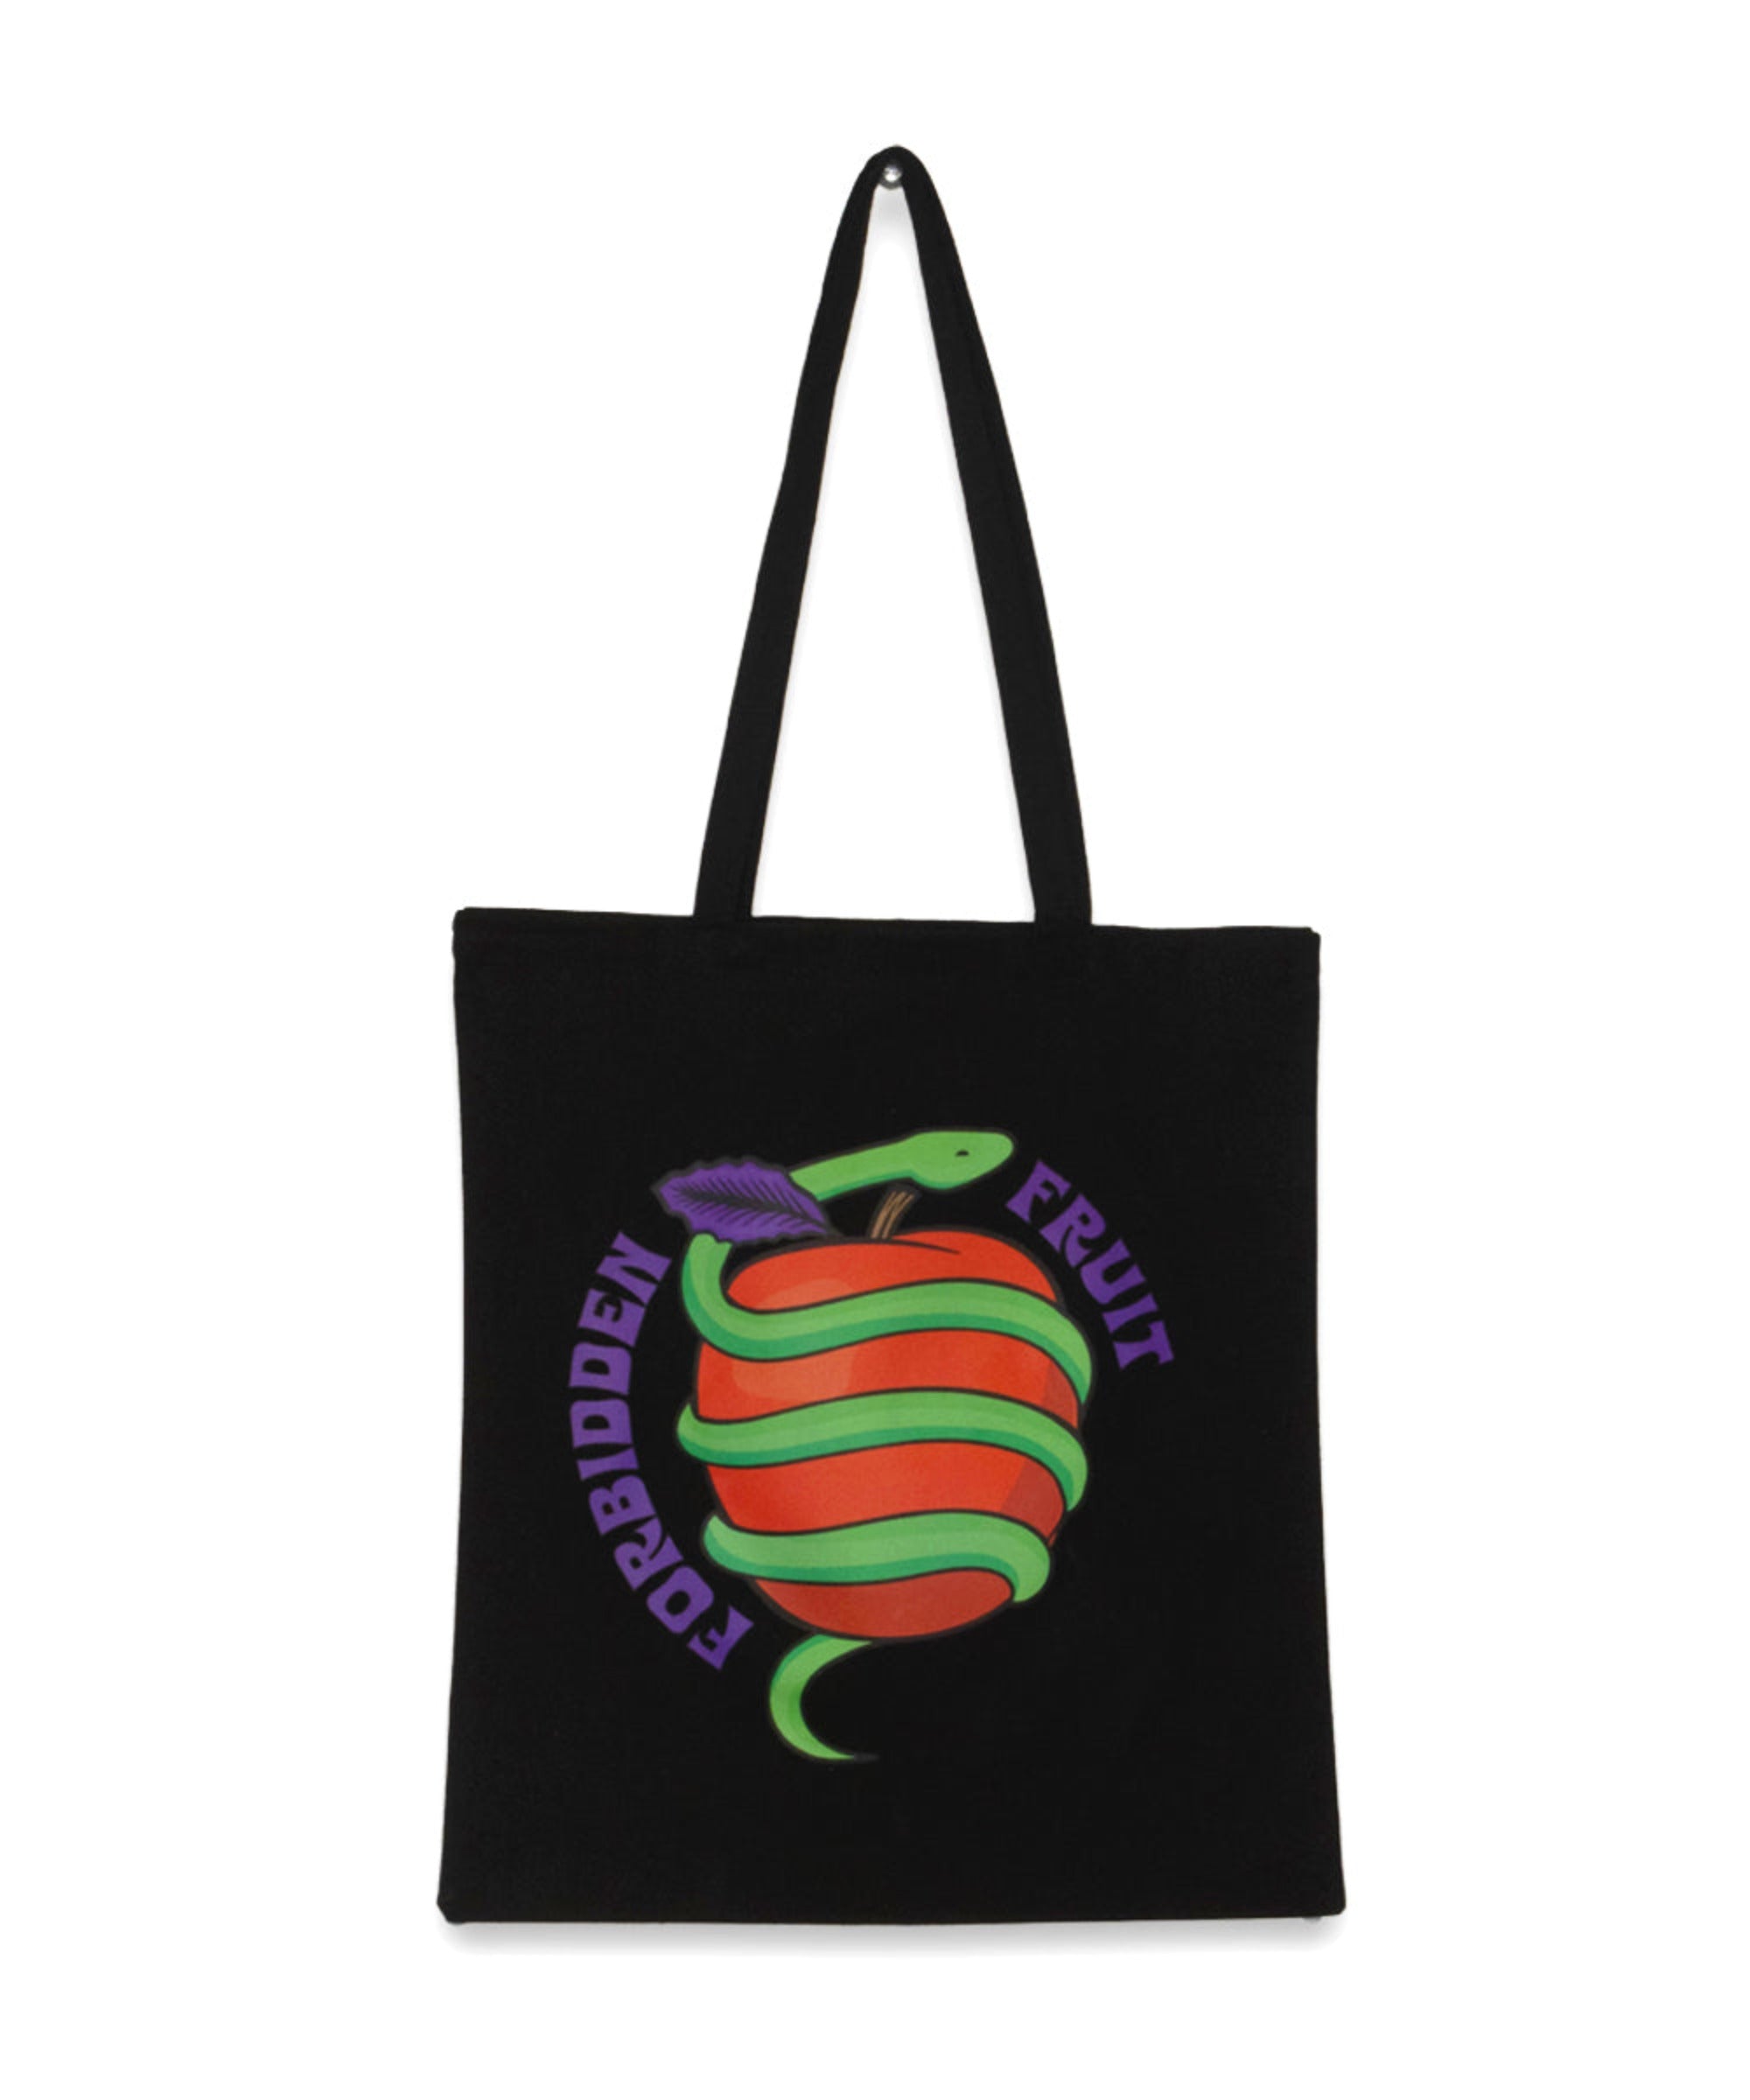 Forbidden Tote Bag With Graphic Print In Black